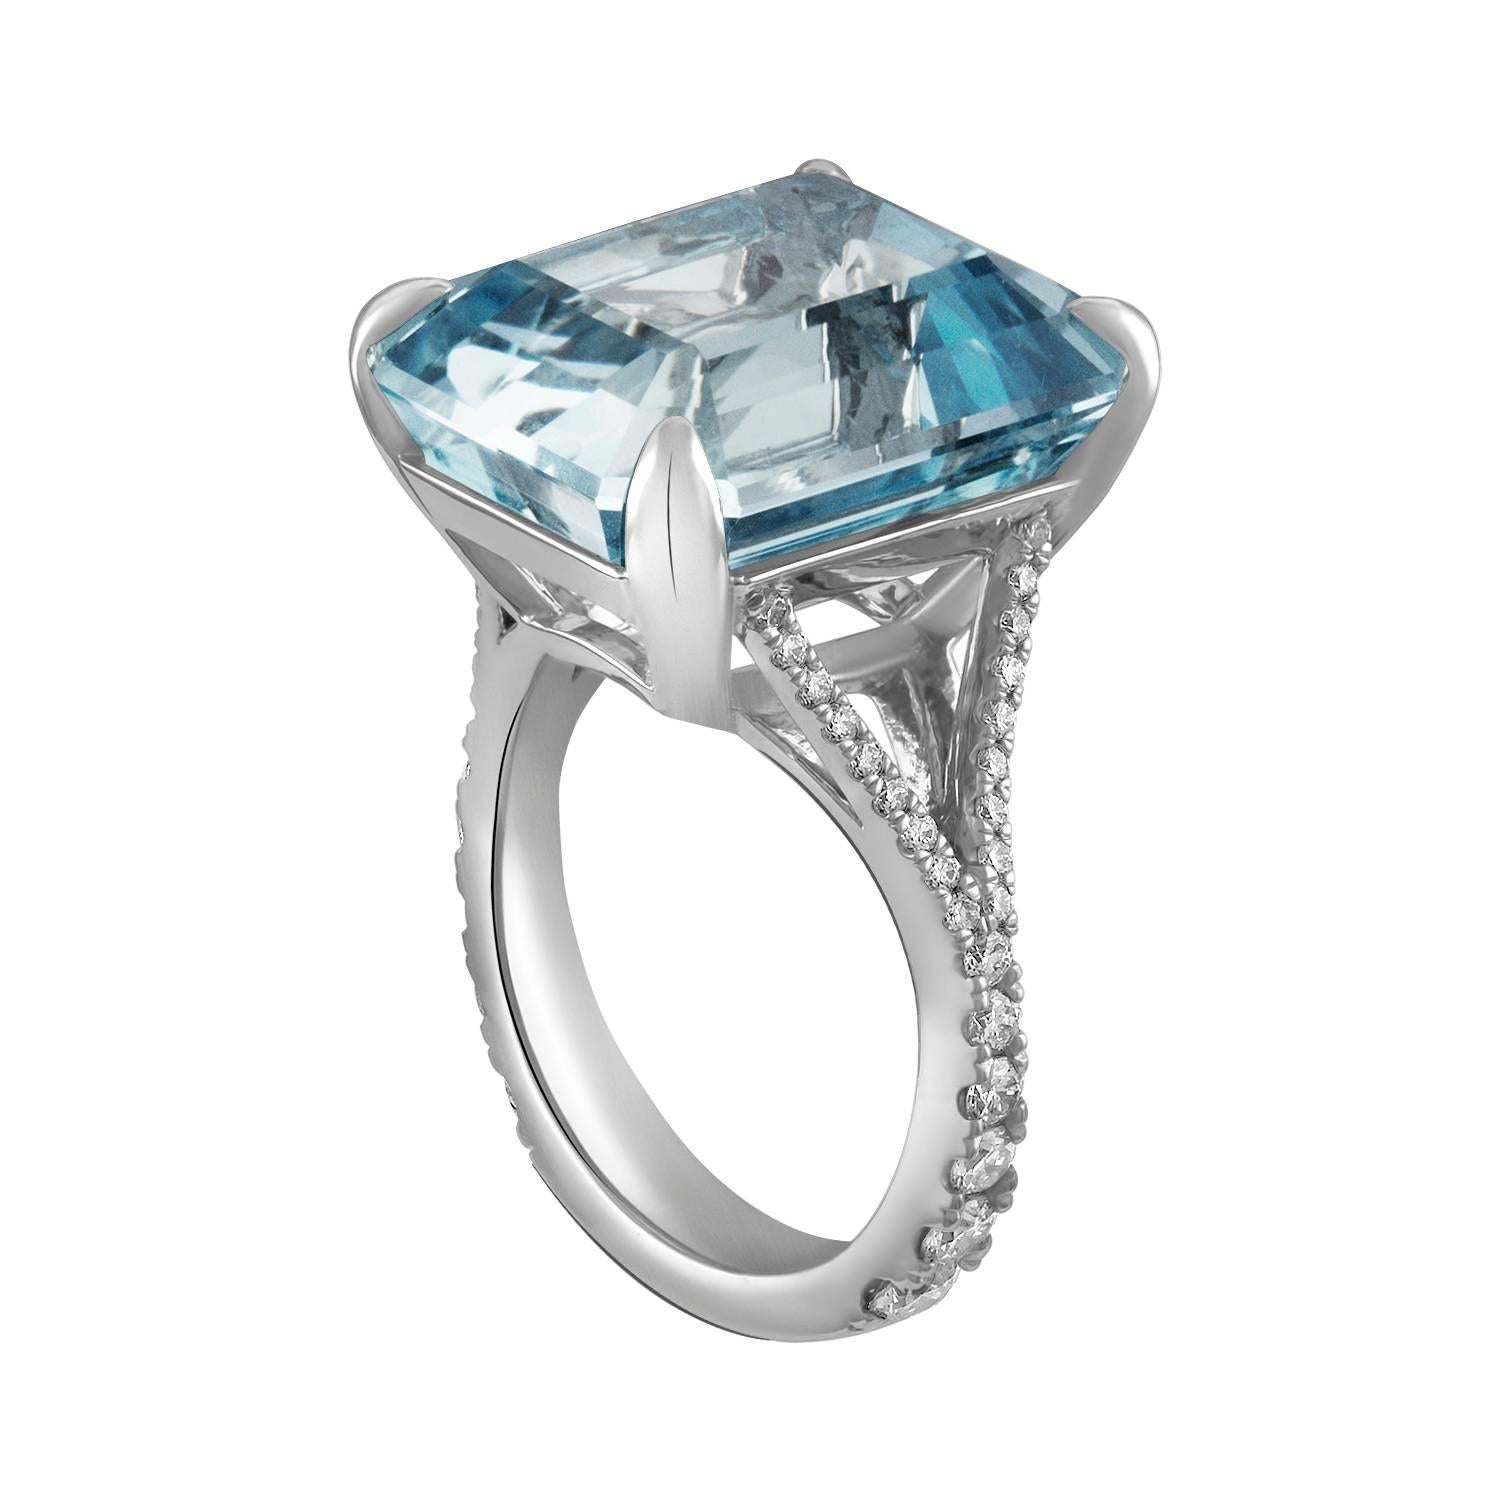 This 18.15ct emerald cut natural Brazilian aquamarine is set in Shah & Shah's handmade platinum and diamond split shank cocktail ring with 48 colorless diamonds that total 0.80cts. 

The ring is a size 7. Initial sizing is complimentary and an